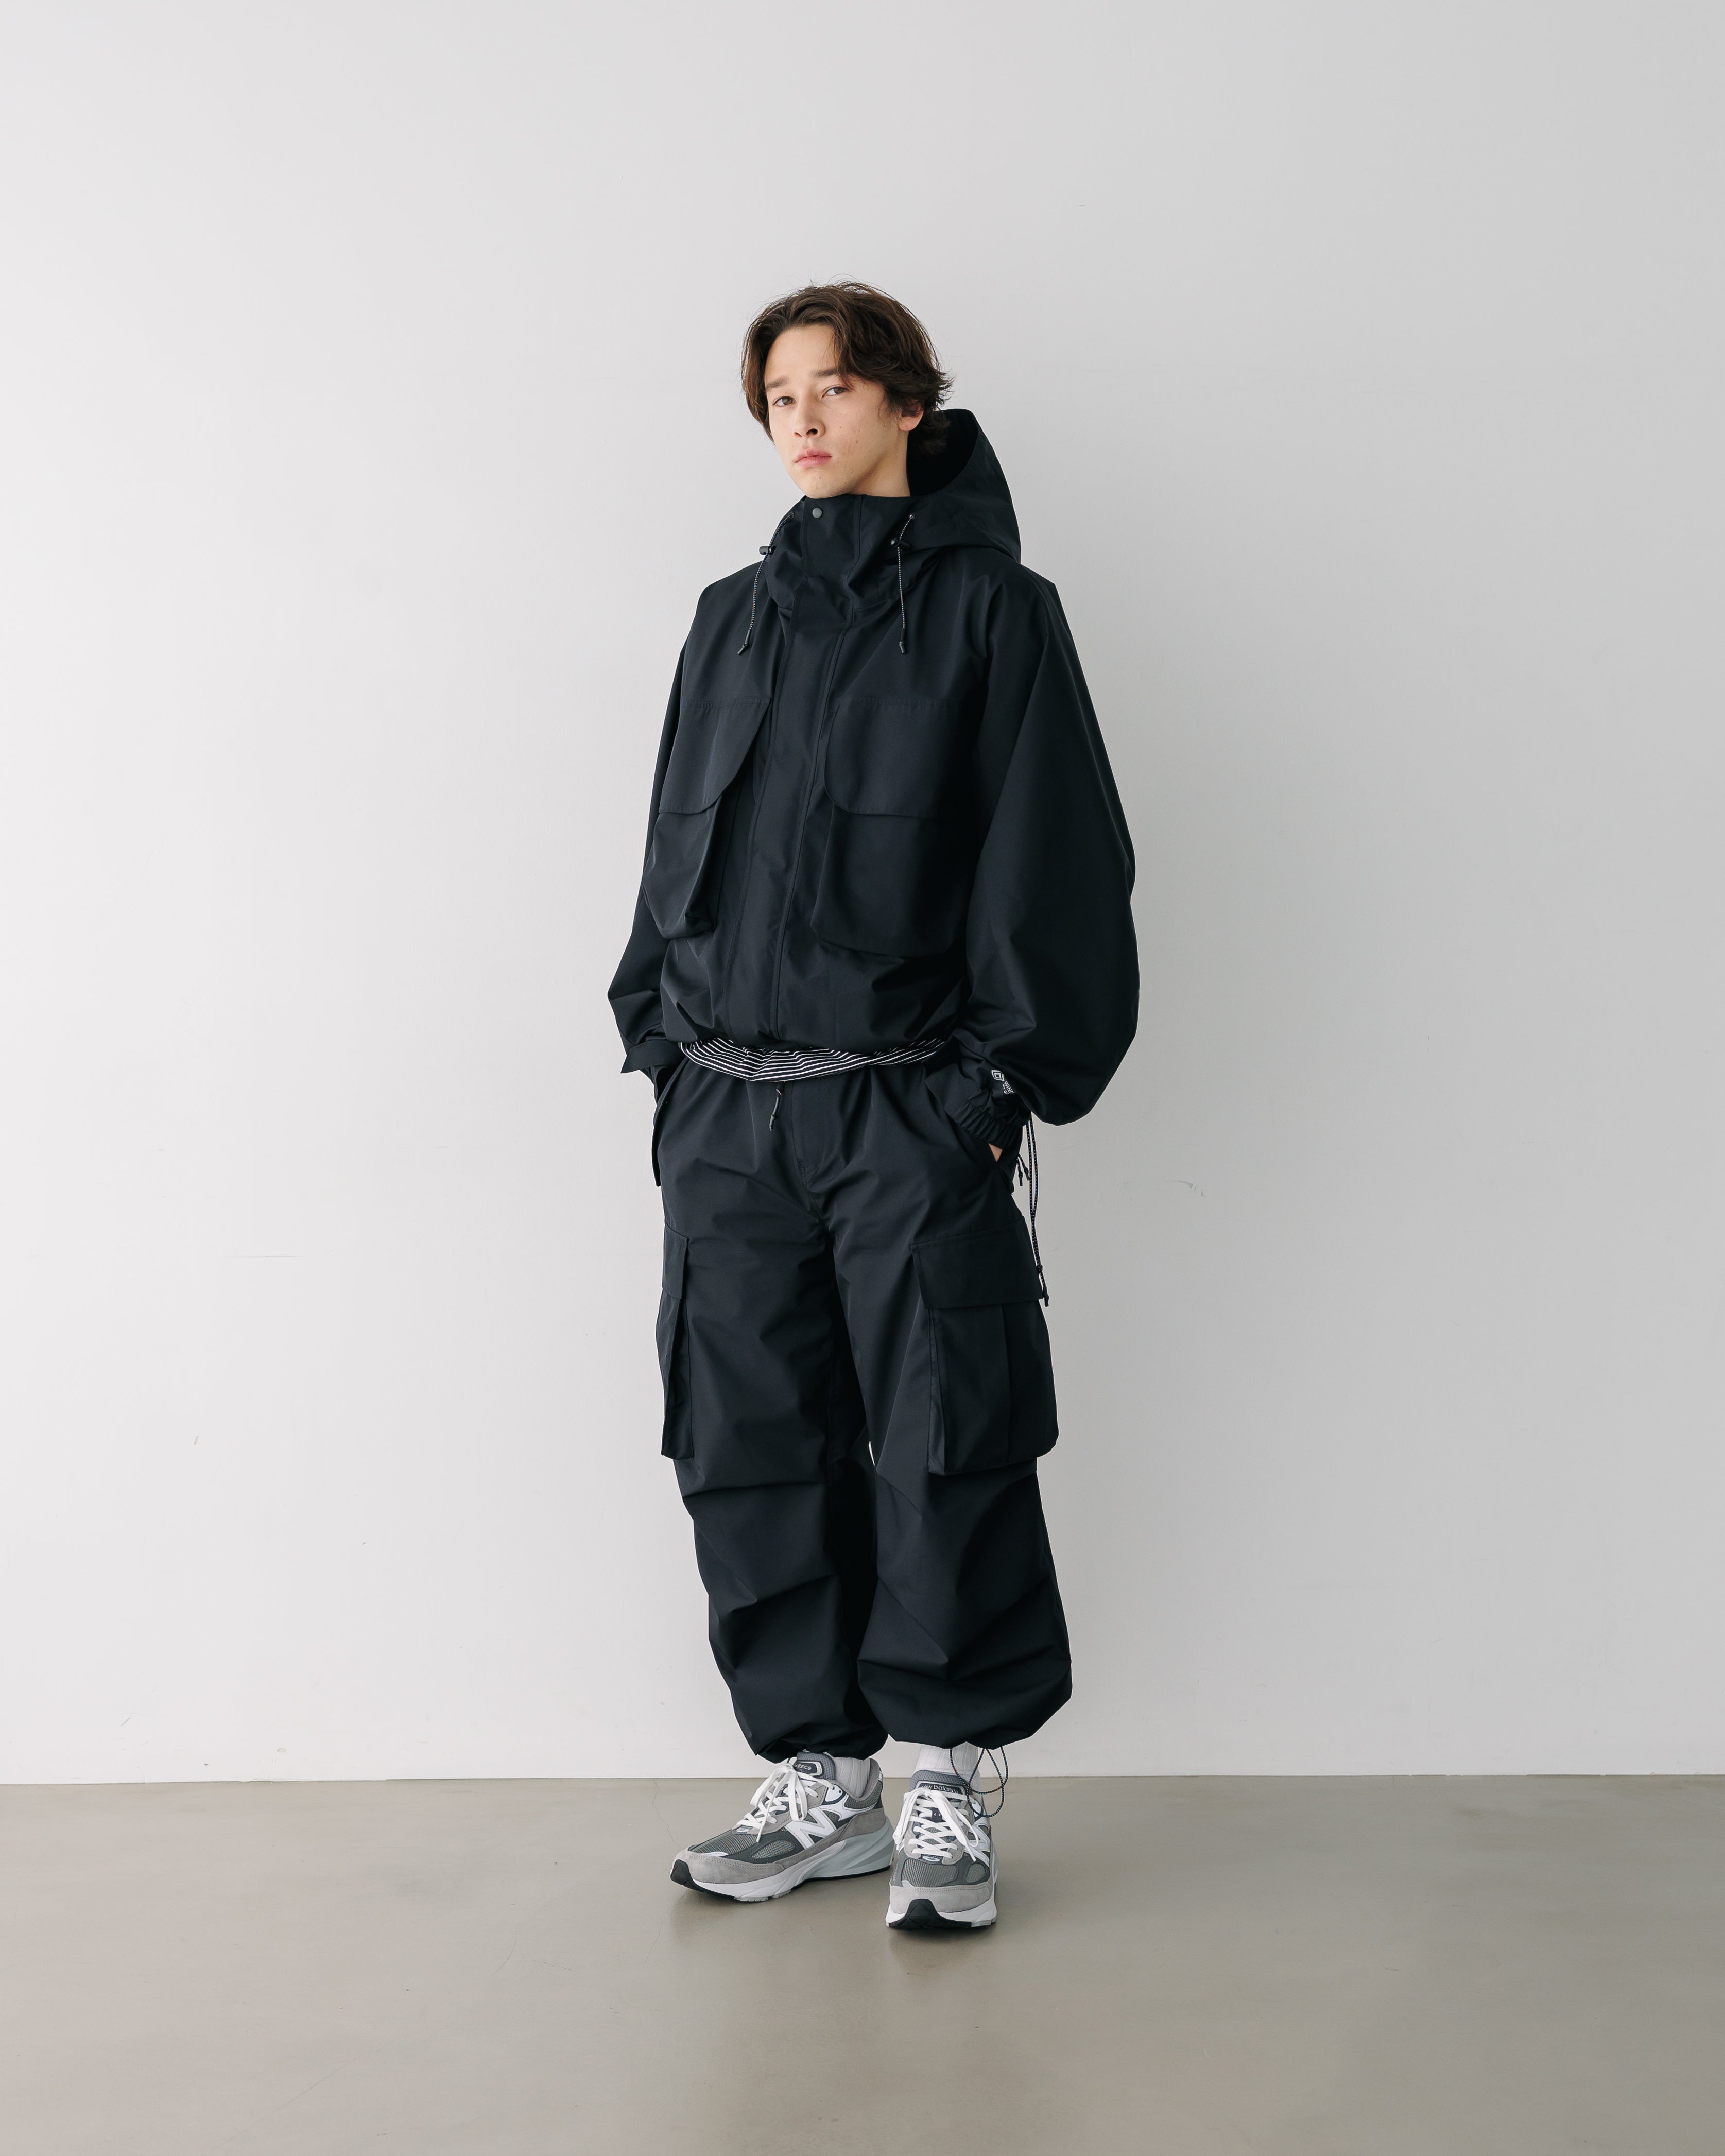 3.6 wed 20:00- Pre-order】+phenix WINDSTOPPER® by GORE-TEX LABS CITY M